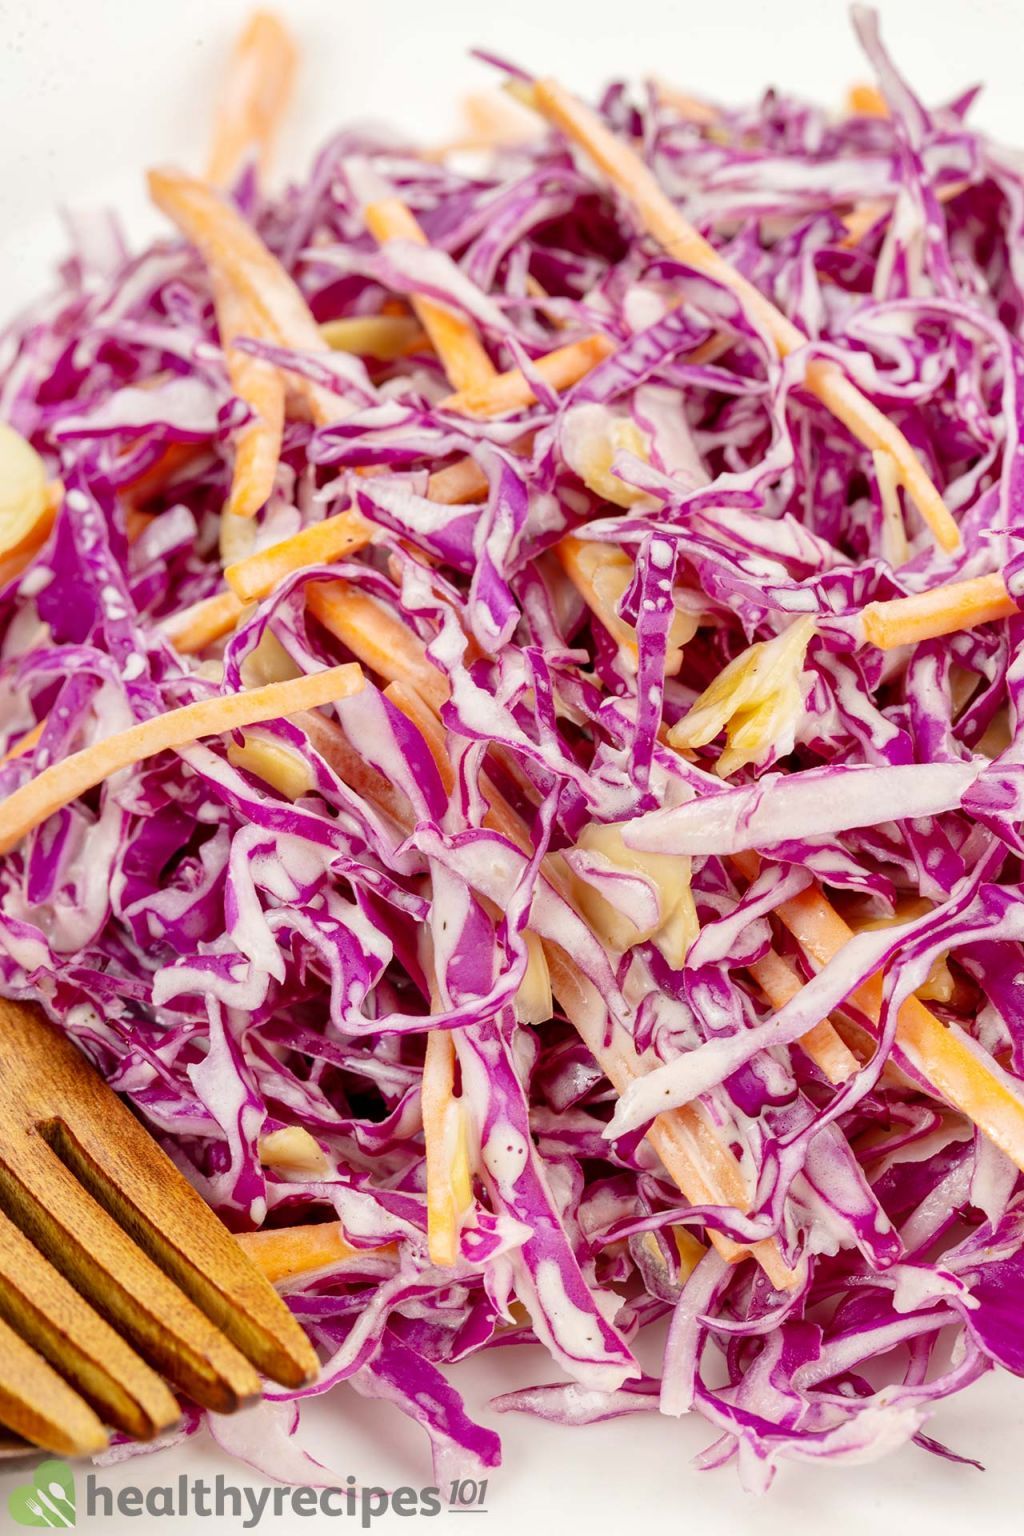 Red Cabbage Salad Recipe: How to Make This Side Dish from Scratch